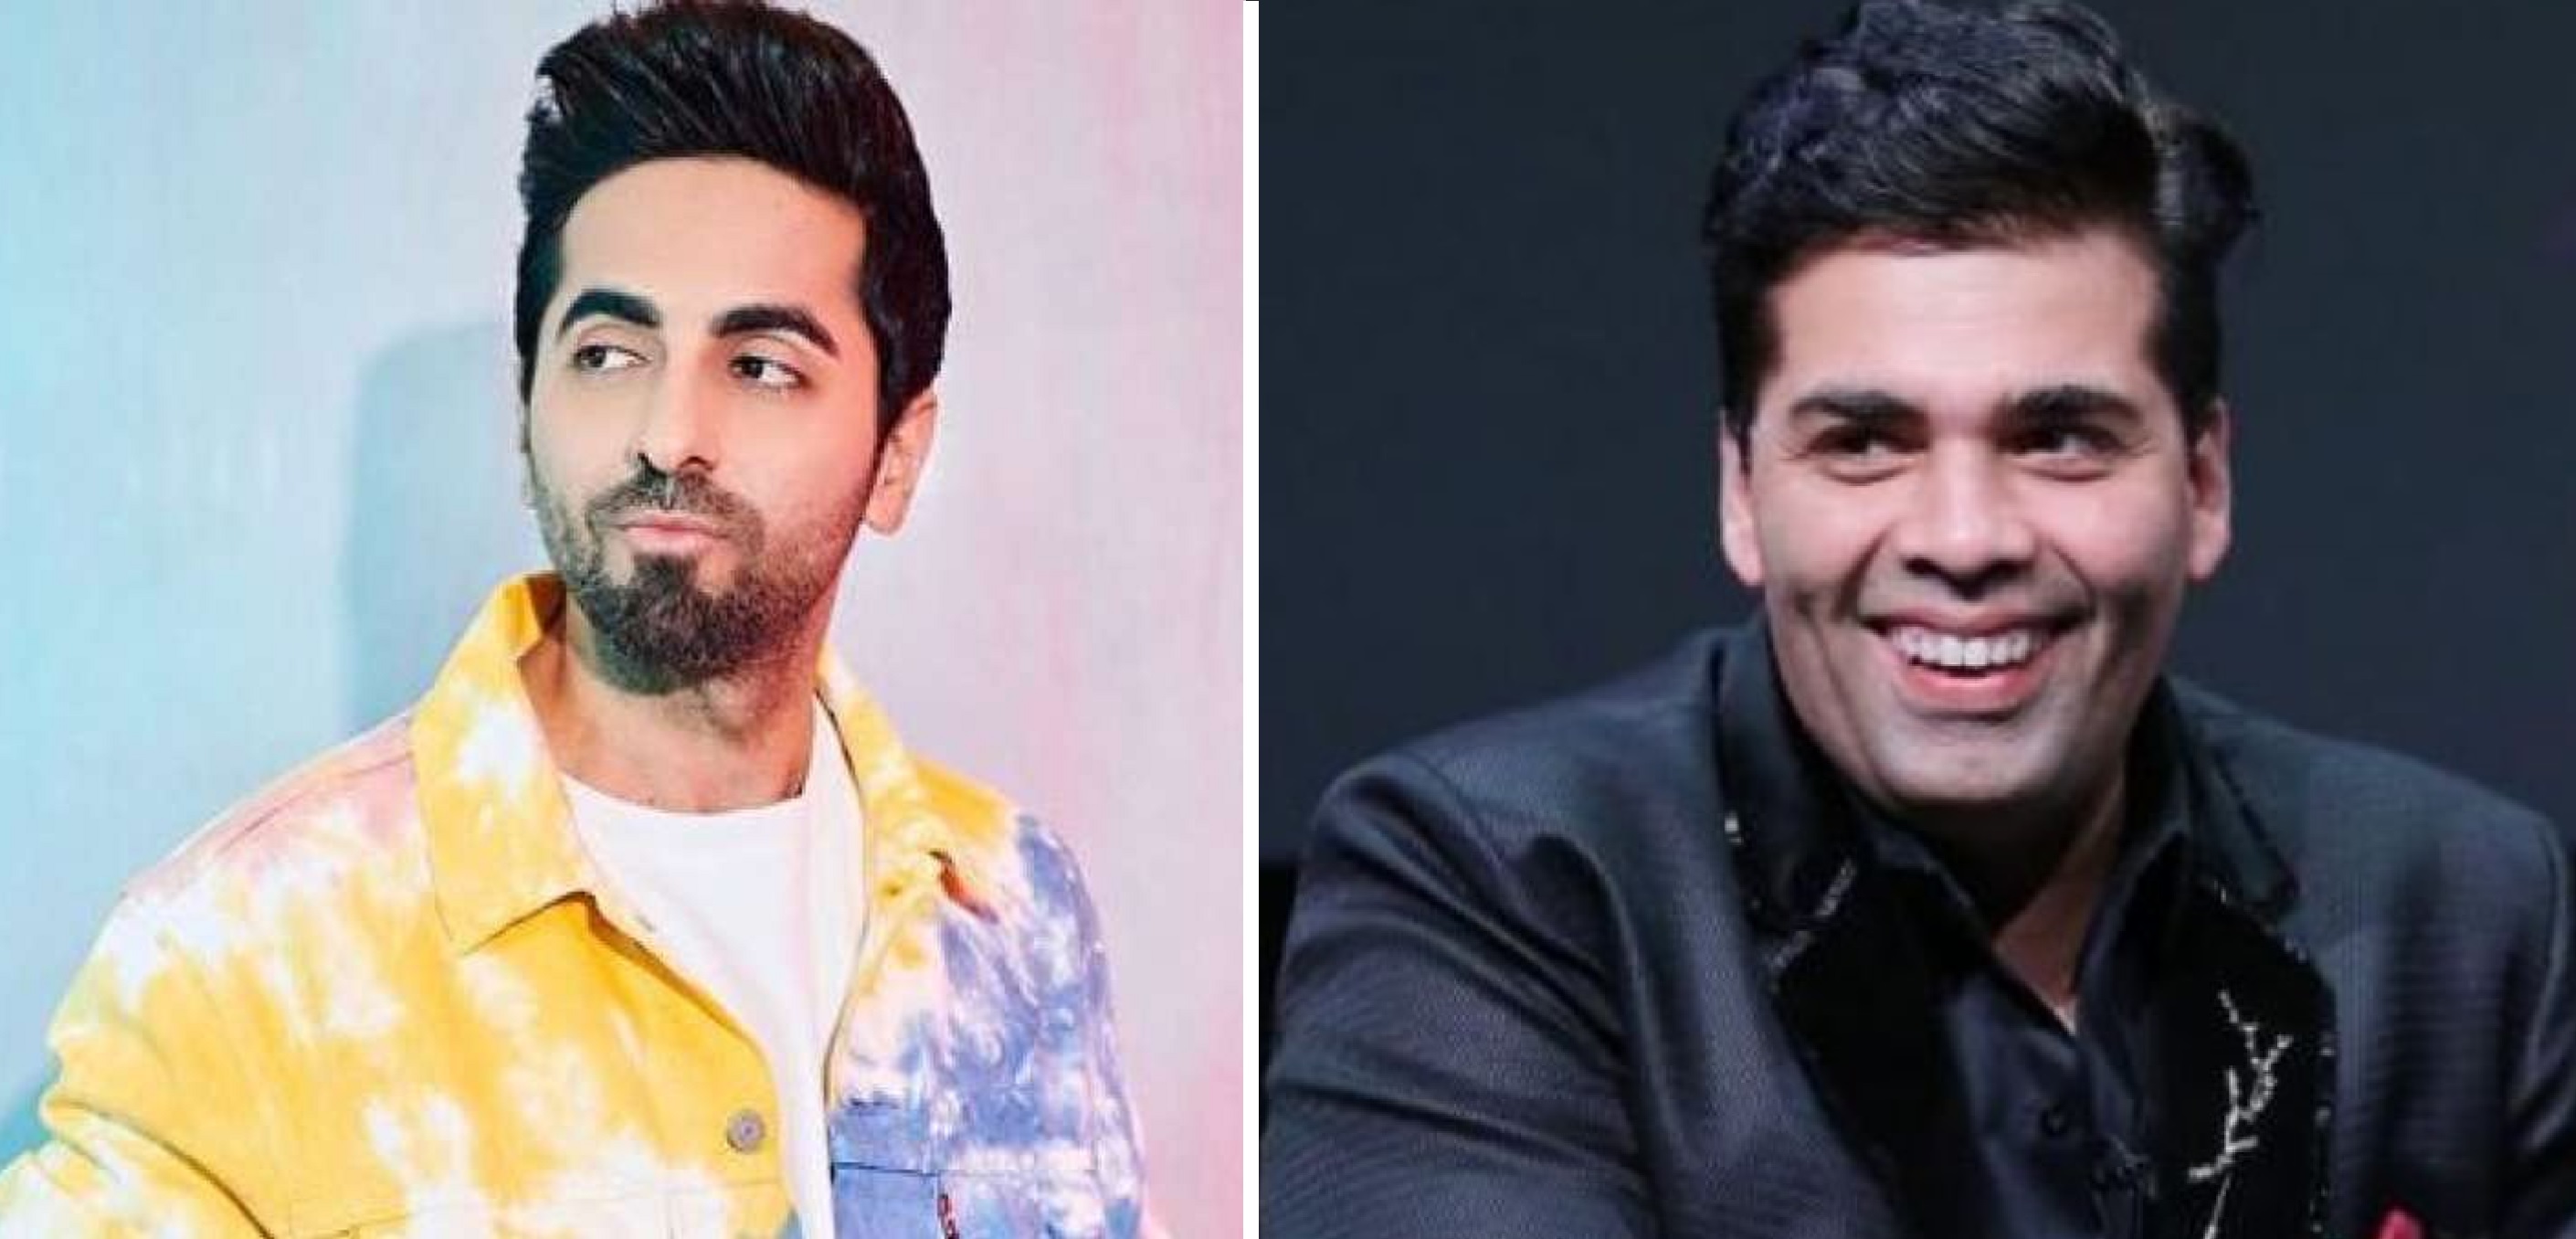 Ayushmann Khurrana Was Once Refused Work By Karan Johar’s Office, As “They Only Work With Star Kids”